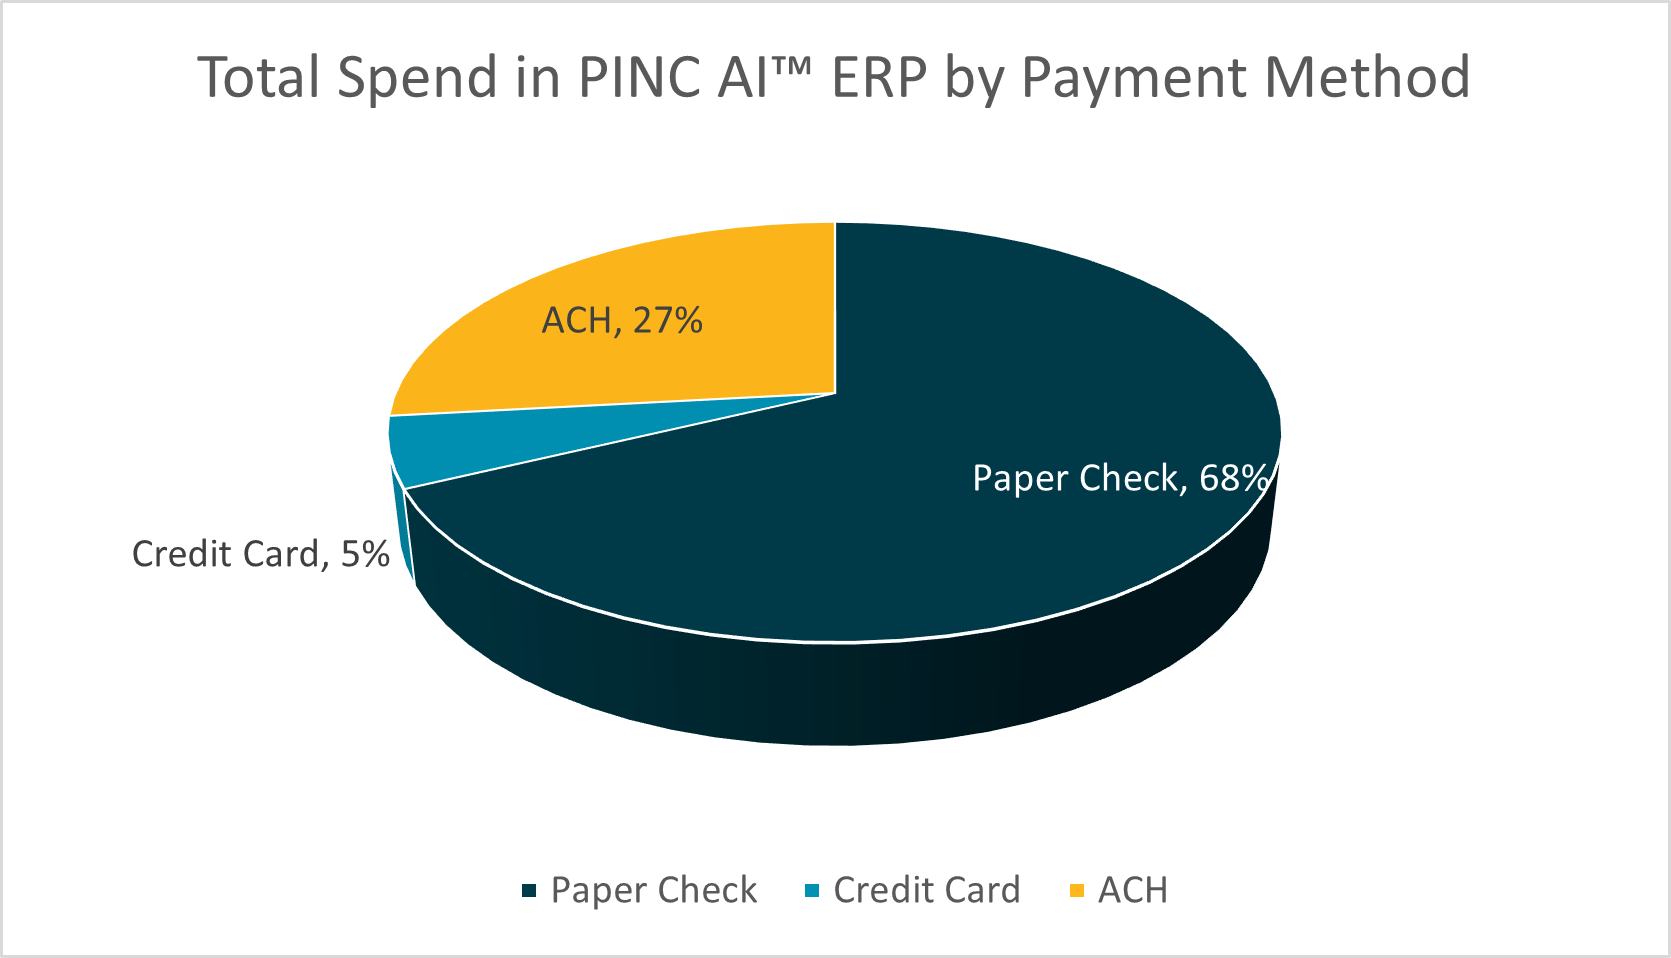 Graphic showing Total Spend in PINC AI ERP by Mayment Method: 5% Credit Card, 27% ACH and 86% Paper Check.